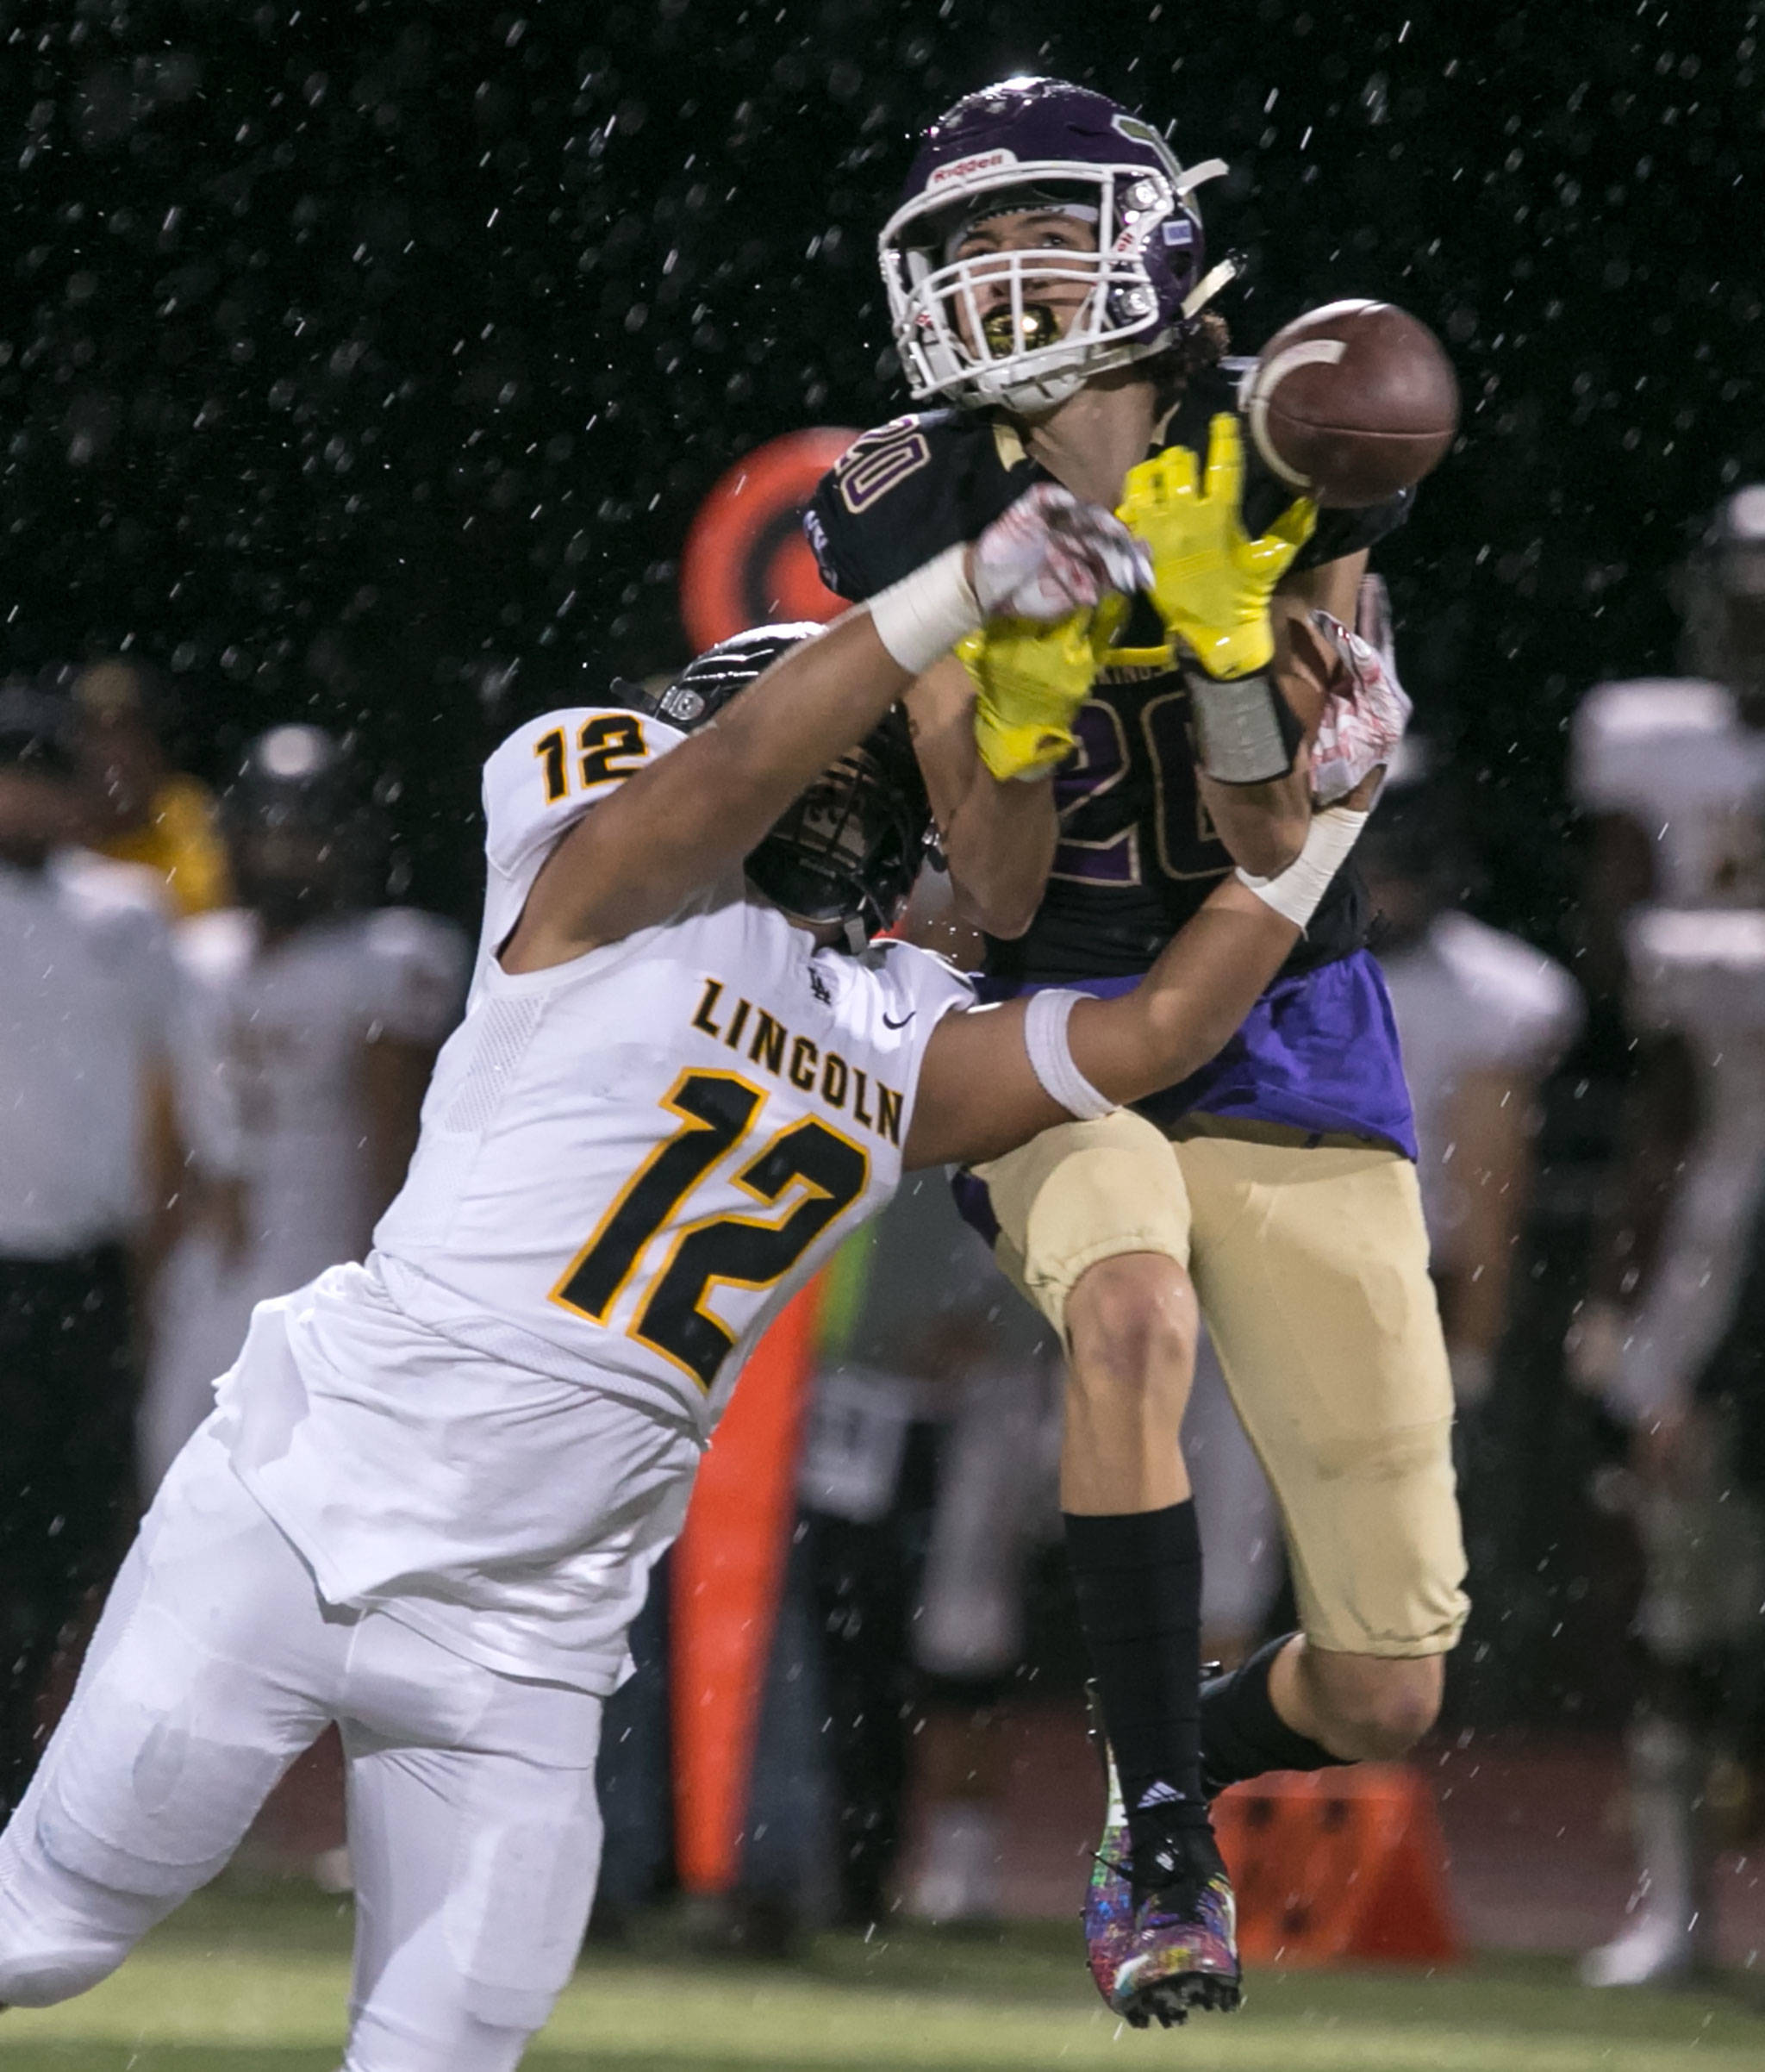 Lincoln’s Irae Savaiinaea breaks up a pass intended for Lake Stevens’ Joe Gonzales during a game on Sept. 7, 2018,at Lake Stevens High School. Lake Stevens won 38-21. (Kevin Clark / The Herald)